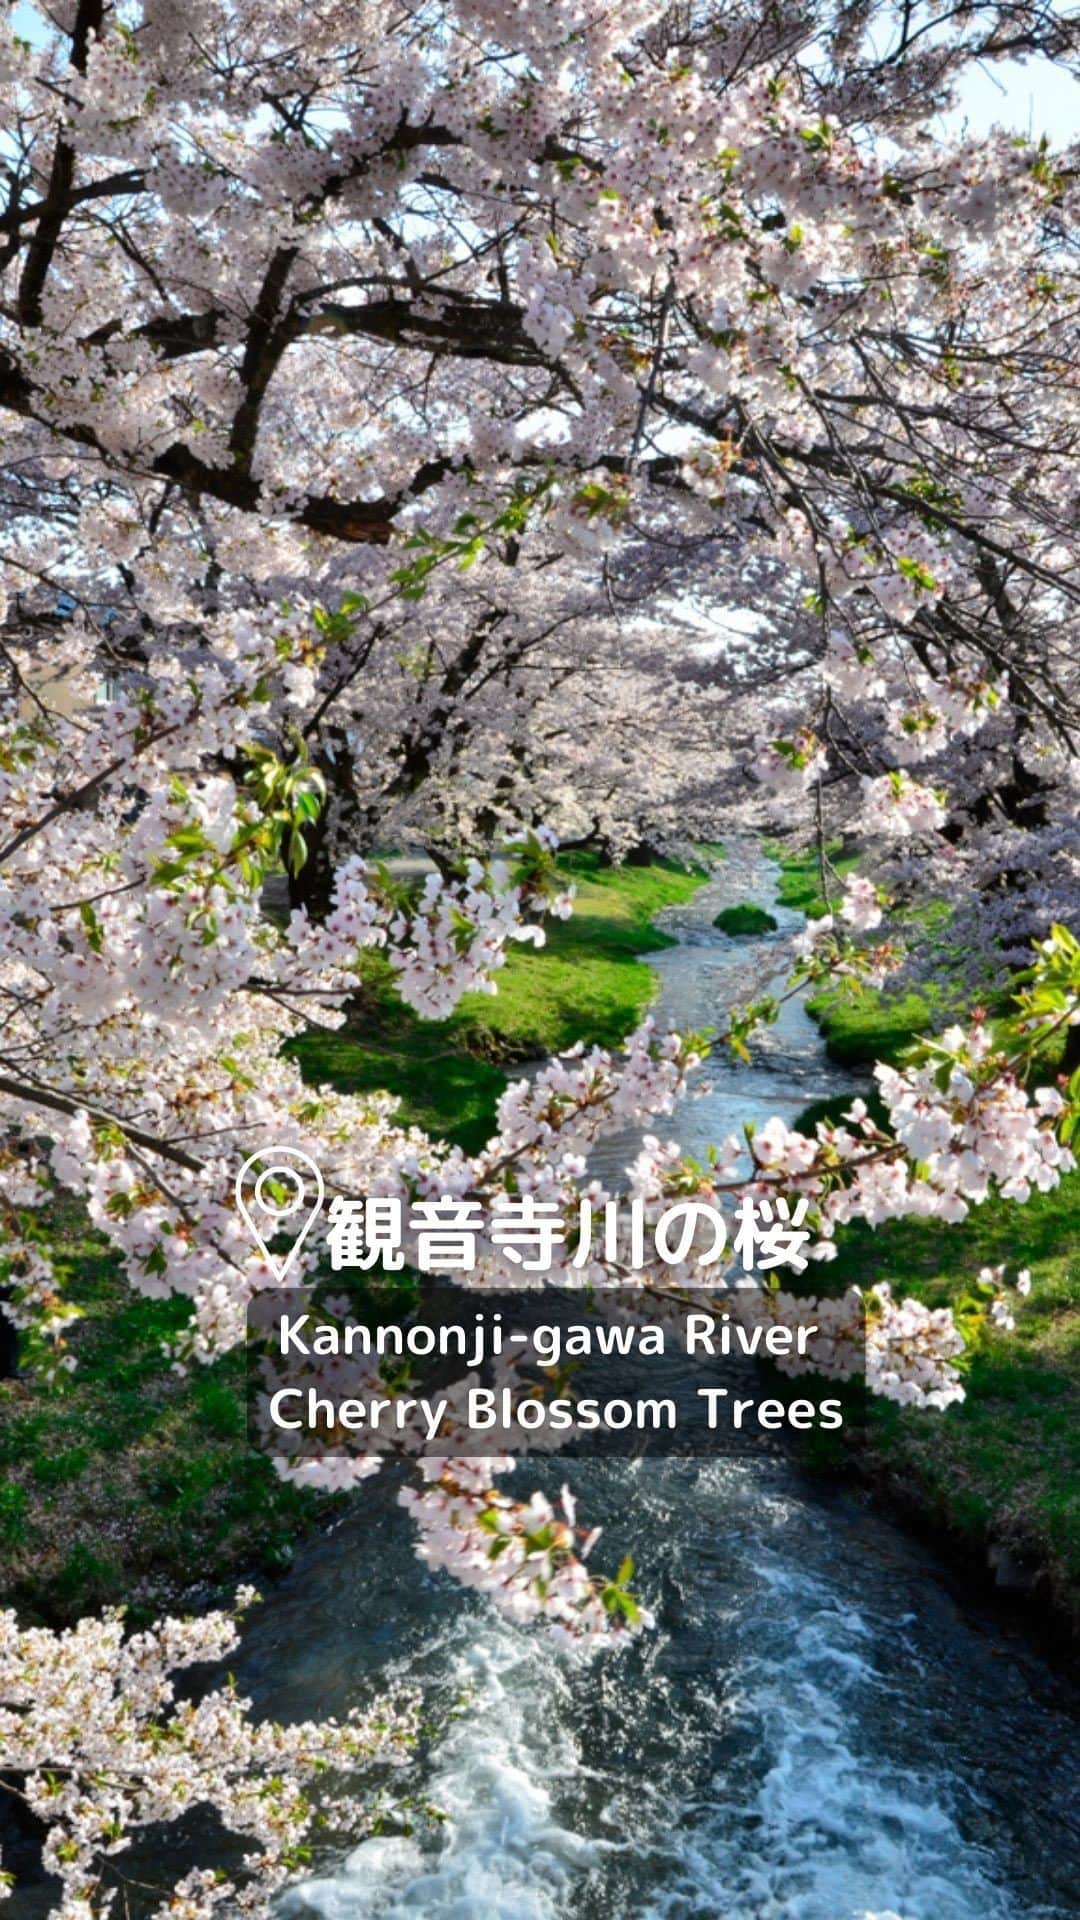 Rediscover Fukushimaのインスタグラム：「UPDATE (4/12): Current forecasts indicate that the Kannonji-gawa River Cherry Blossoms will be in full bloom starting from around April 13th. We apologize for the inconvenience. 🙇‍♀️  🌸The Kannonji-gawa River Cherry Trees will be in full bloom next month!🌸  📍Kannonji-gawa River (観音寺川), Inawashiro Town (猪苗代町), Fukushima Prefecture（福島県）  🚗By Car: 10 min from Inawashiro Bandaikogen I.C. off the Ban-etsu Expressway  🚉By Train: 3 min walk from Kawageta Station (JR Ban-etsu West Line)  👉Due to heavy rainfall, part of the JR Ban-etsu West Line had to halt operations last year…but the entire line is expected to resume operations from April 1st!  So, if you’re thinking of doing a railway getaway next month to enjoy a wonderful sakura wonderland (using the JR Tohoku Pass, perhaps)… save this post! 🔖💕  As of today (March 28), the Kannonji-gawa River Cherry Trees are expected to be in full bloom in late April (starting from around April 20th!).  Check our website for more information!  #visitfukushima #fukushima #fukushimaprefecture #inawashiro #beautifuljapan #beautiful #visitjapan #japantravel #japantrip #japantravelinspo #sakura #spring #japanspring #sakurajapan #sakuraseason #cherryblossomseason #kannonjigawa #inawashiro #kannonjigawasakura #japanreels #visittohoku #tohokutrip #jrpasstohoku #桜 #東北旅行 #福島観光 #観音寺川の桜」